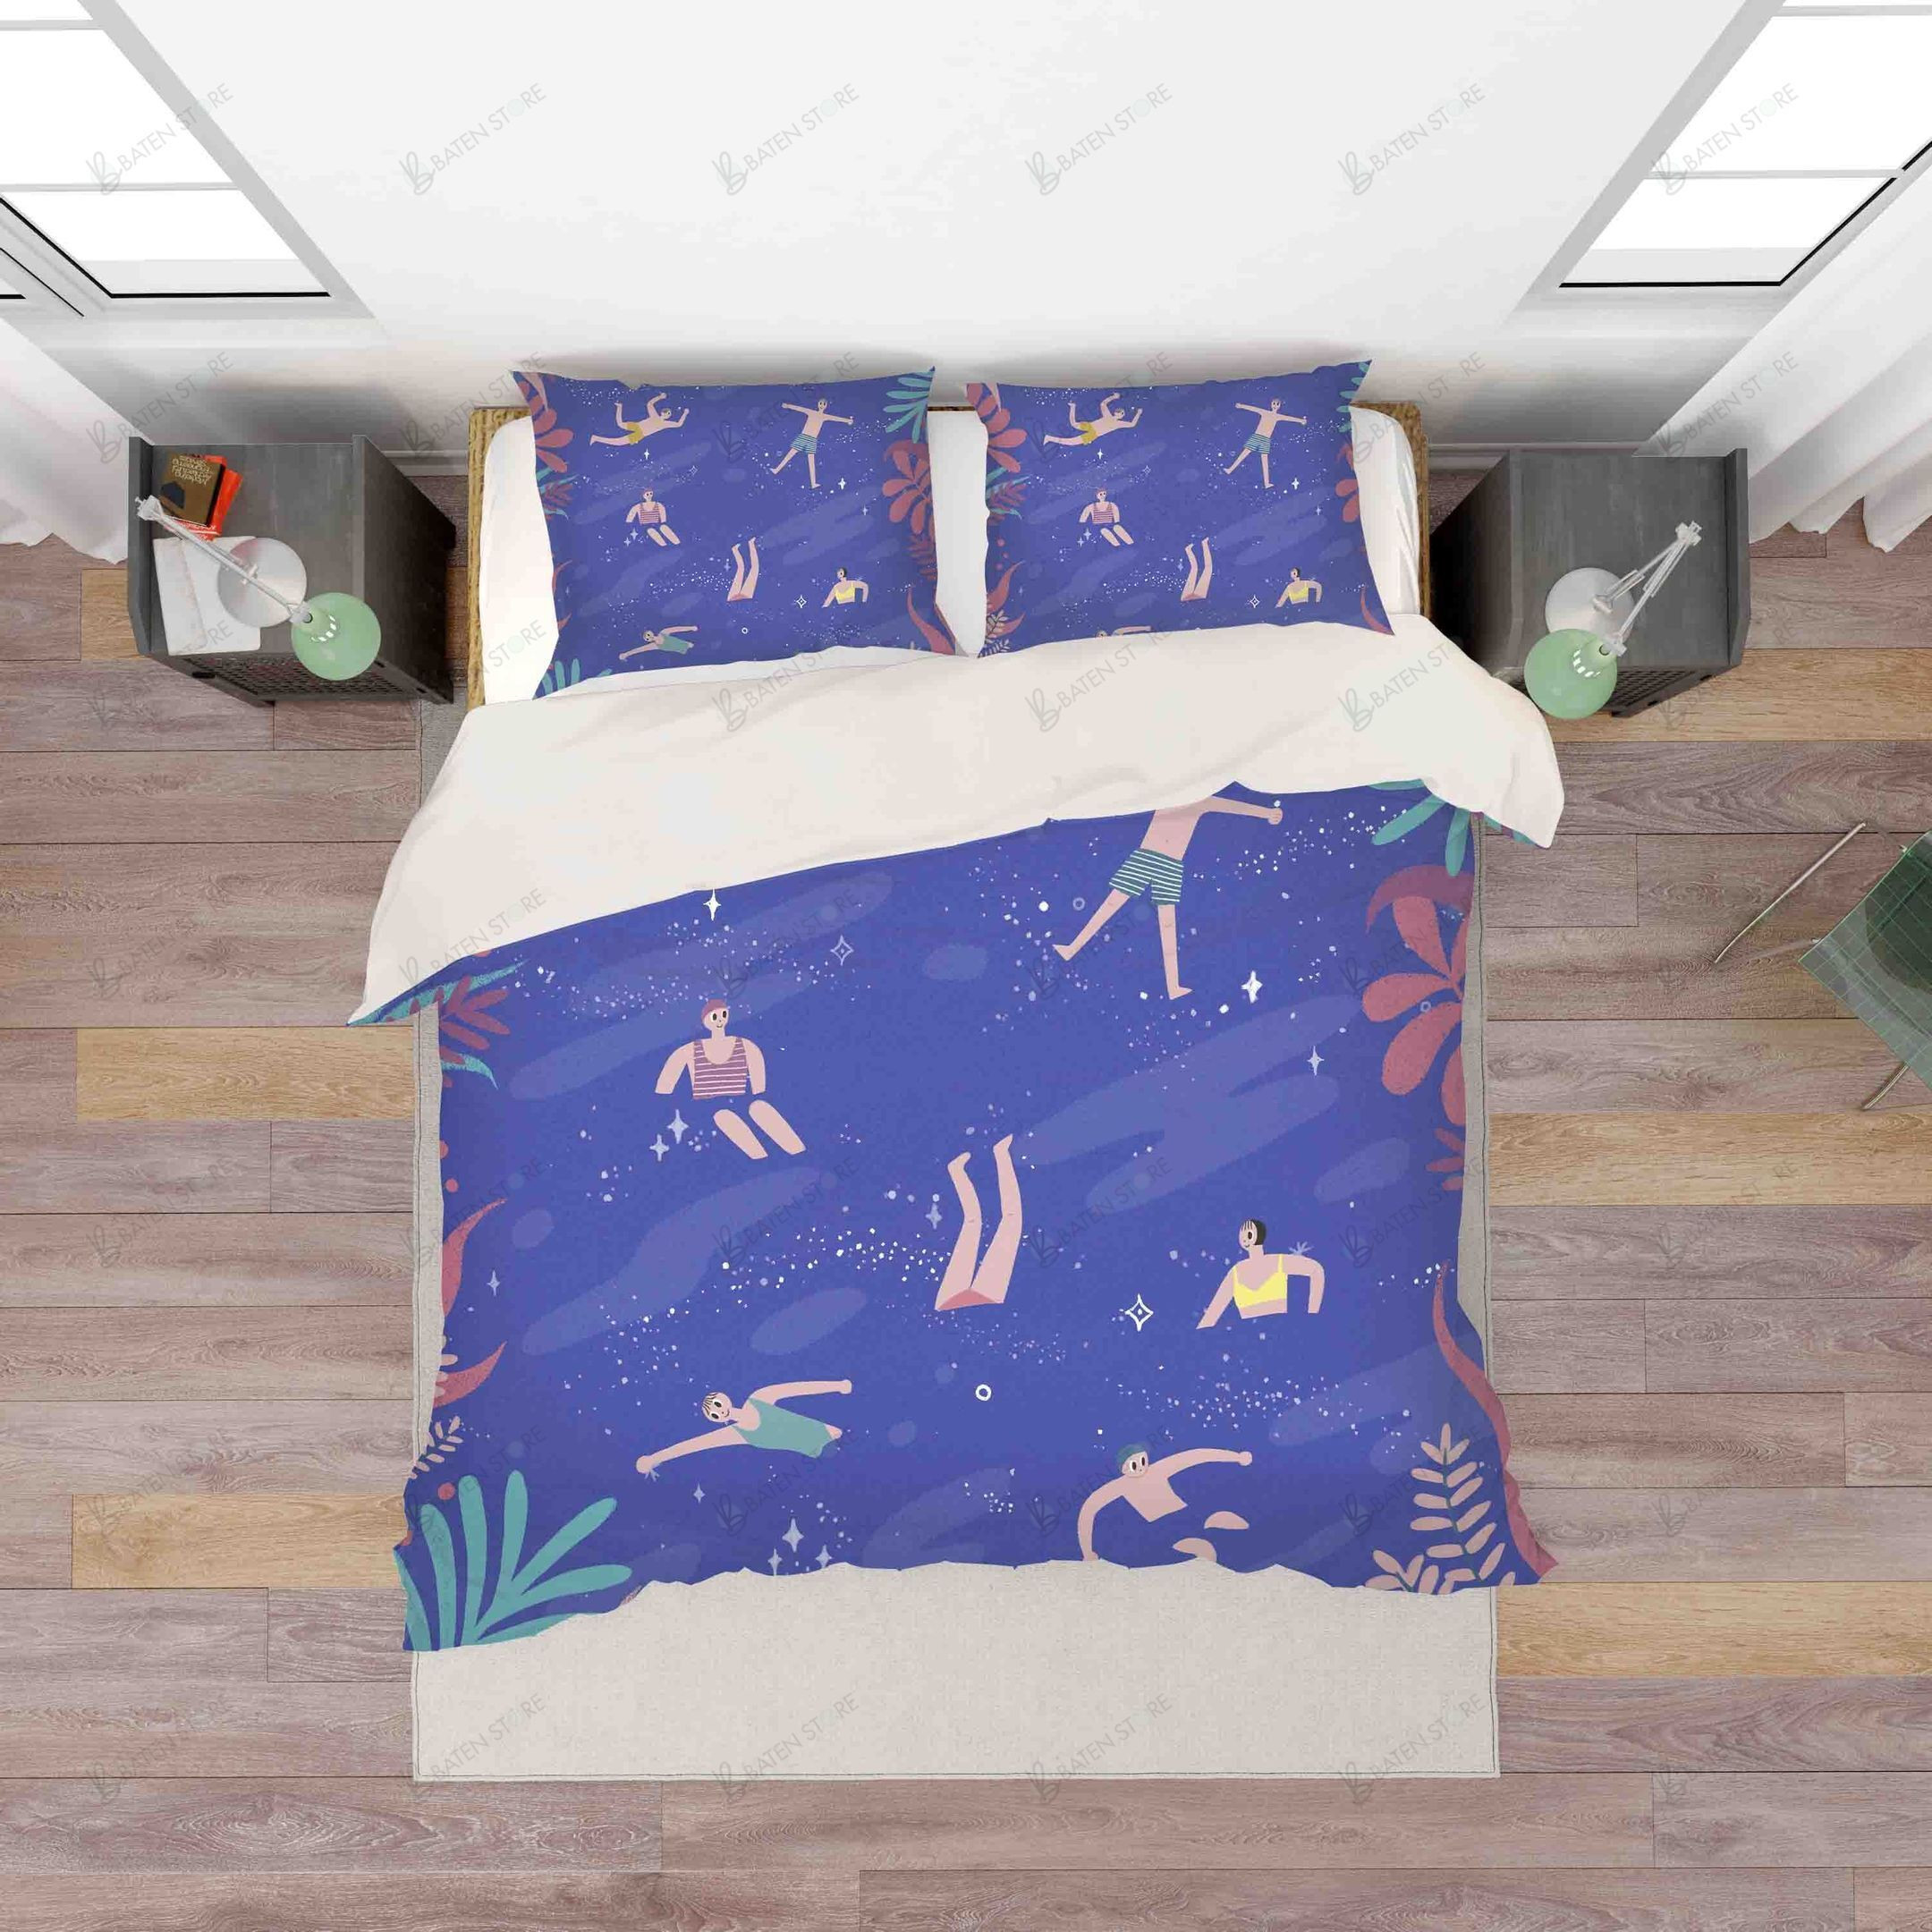 3d blue crab bed sheets duvet cover bedding set perfect presents for birthdays holidays and special occasions p6n3m